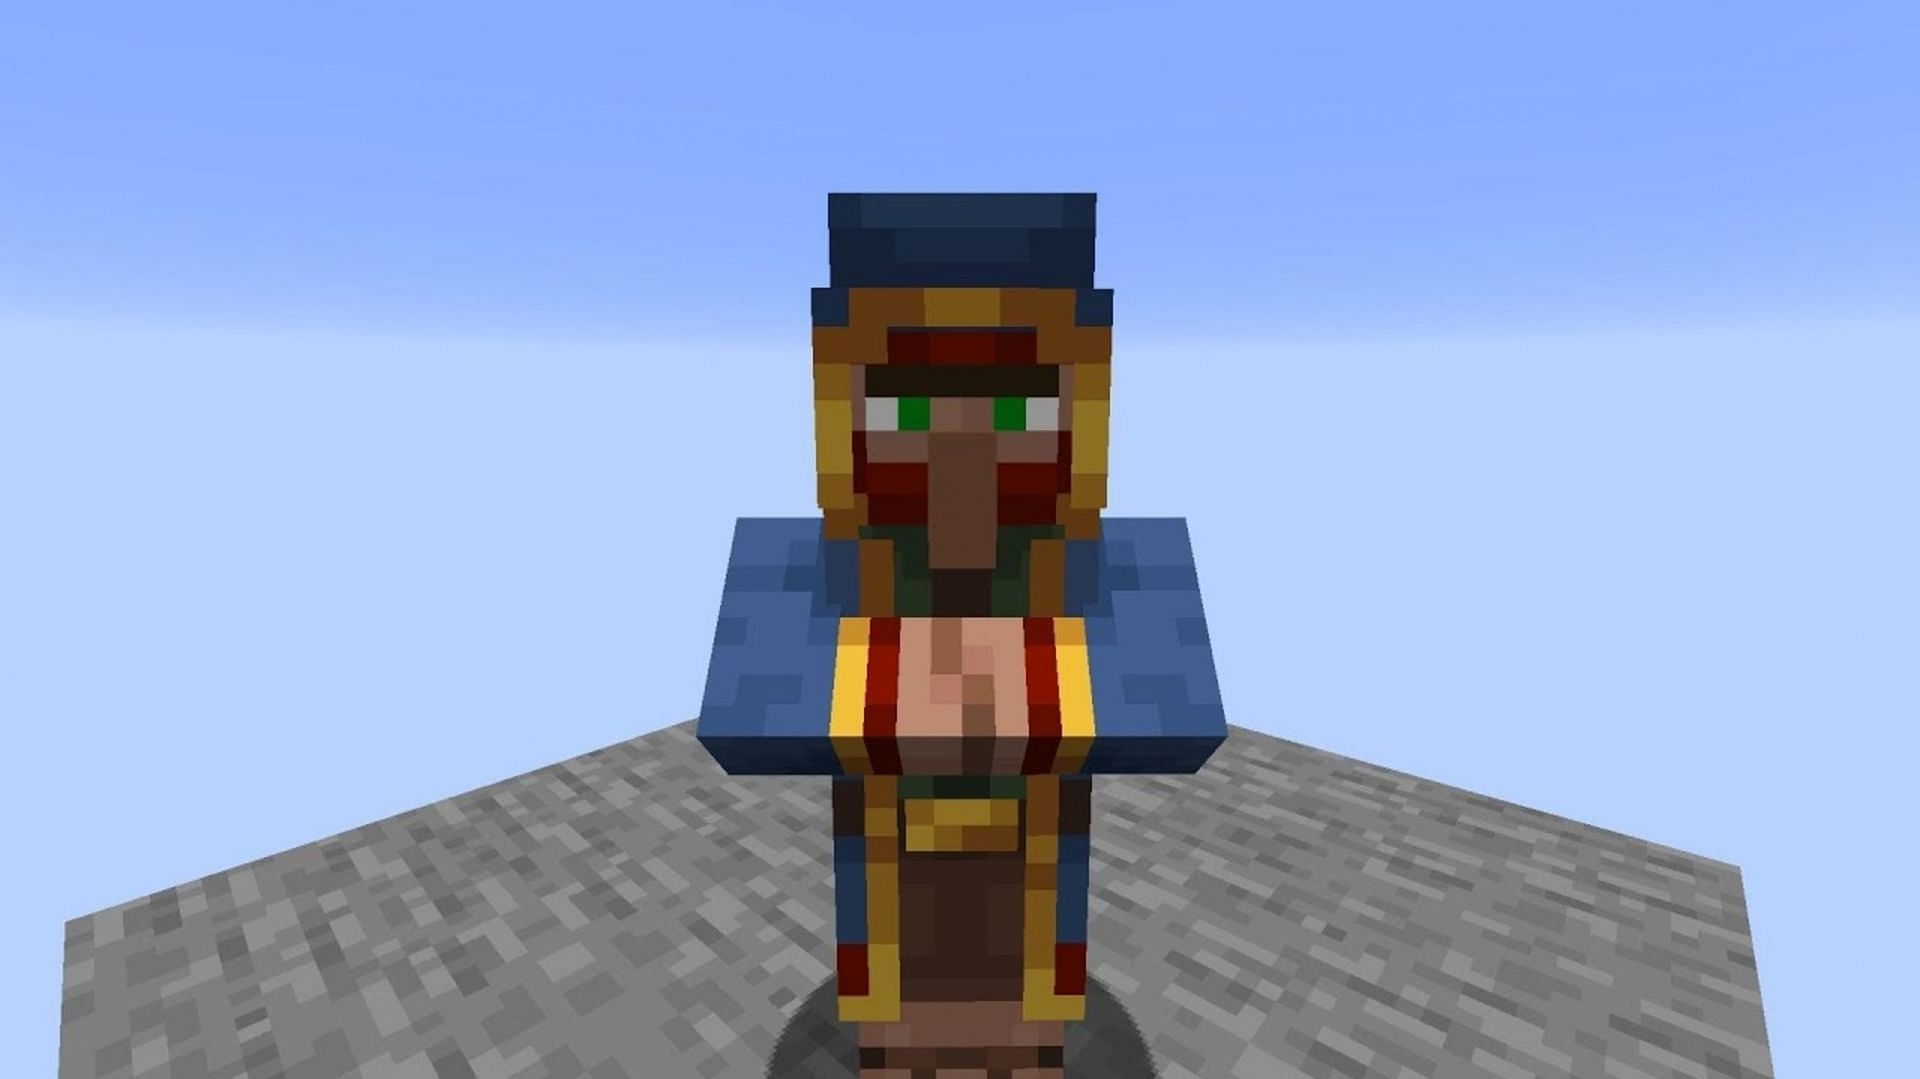 The Wandering Trader&#039;s spawning mechanics allow it to appear even in Skyblock (Image via Youtube user ilmango)